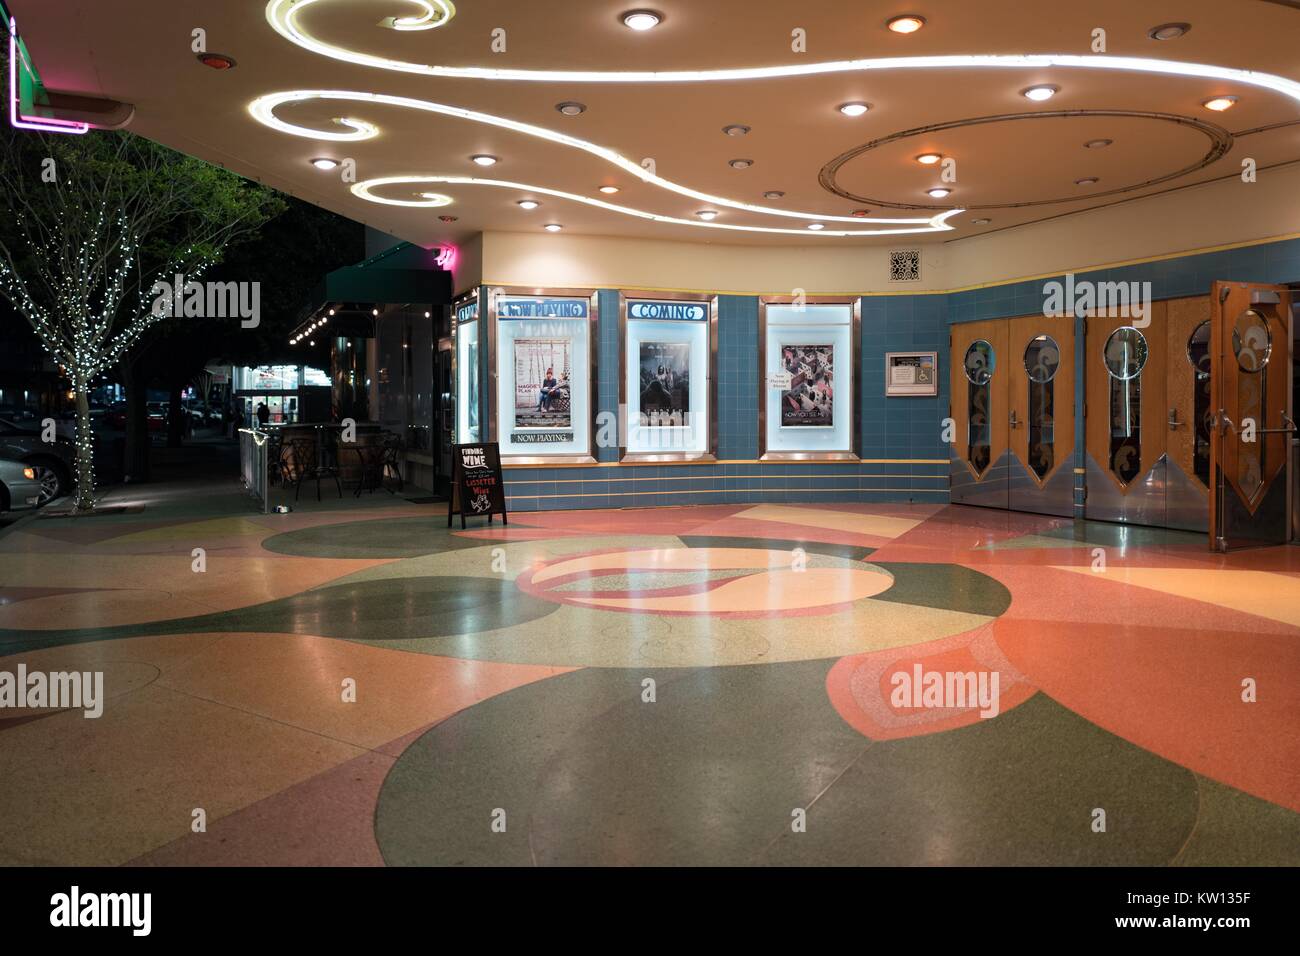 Entryway for the Orinda Theater, an art-deco style theater which originally opened in 1941 and continues to operate in Orinda, California, 2016. Stock Photo